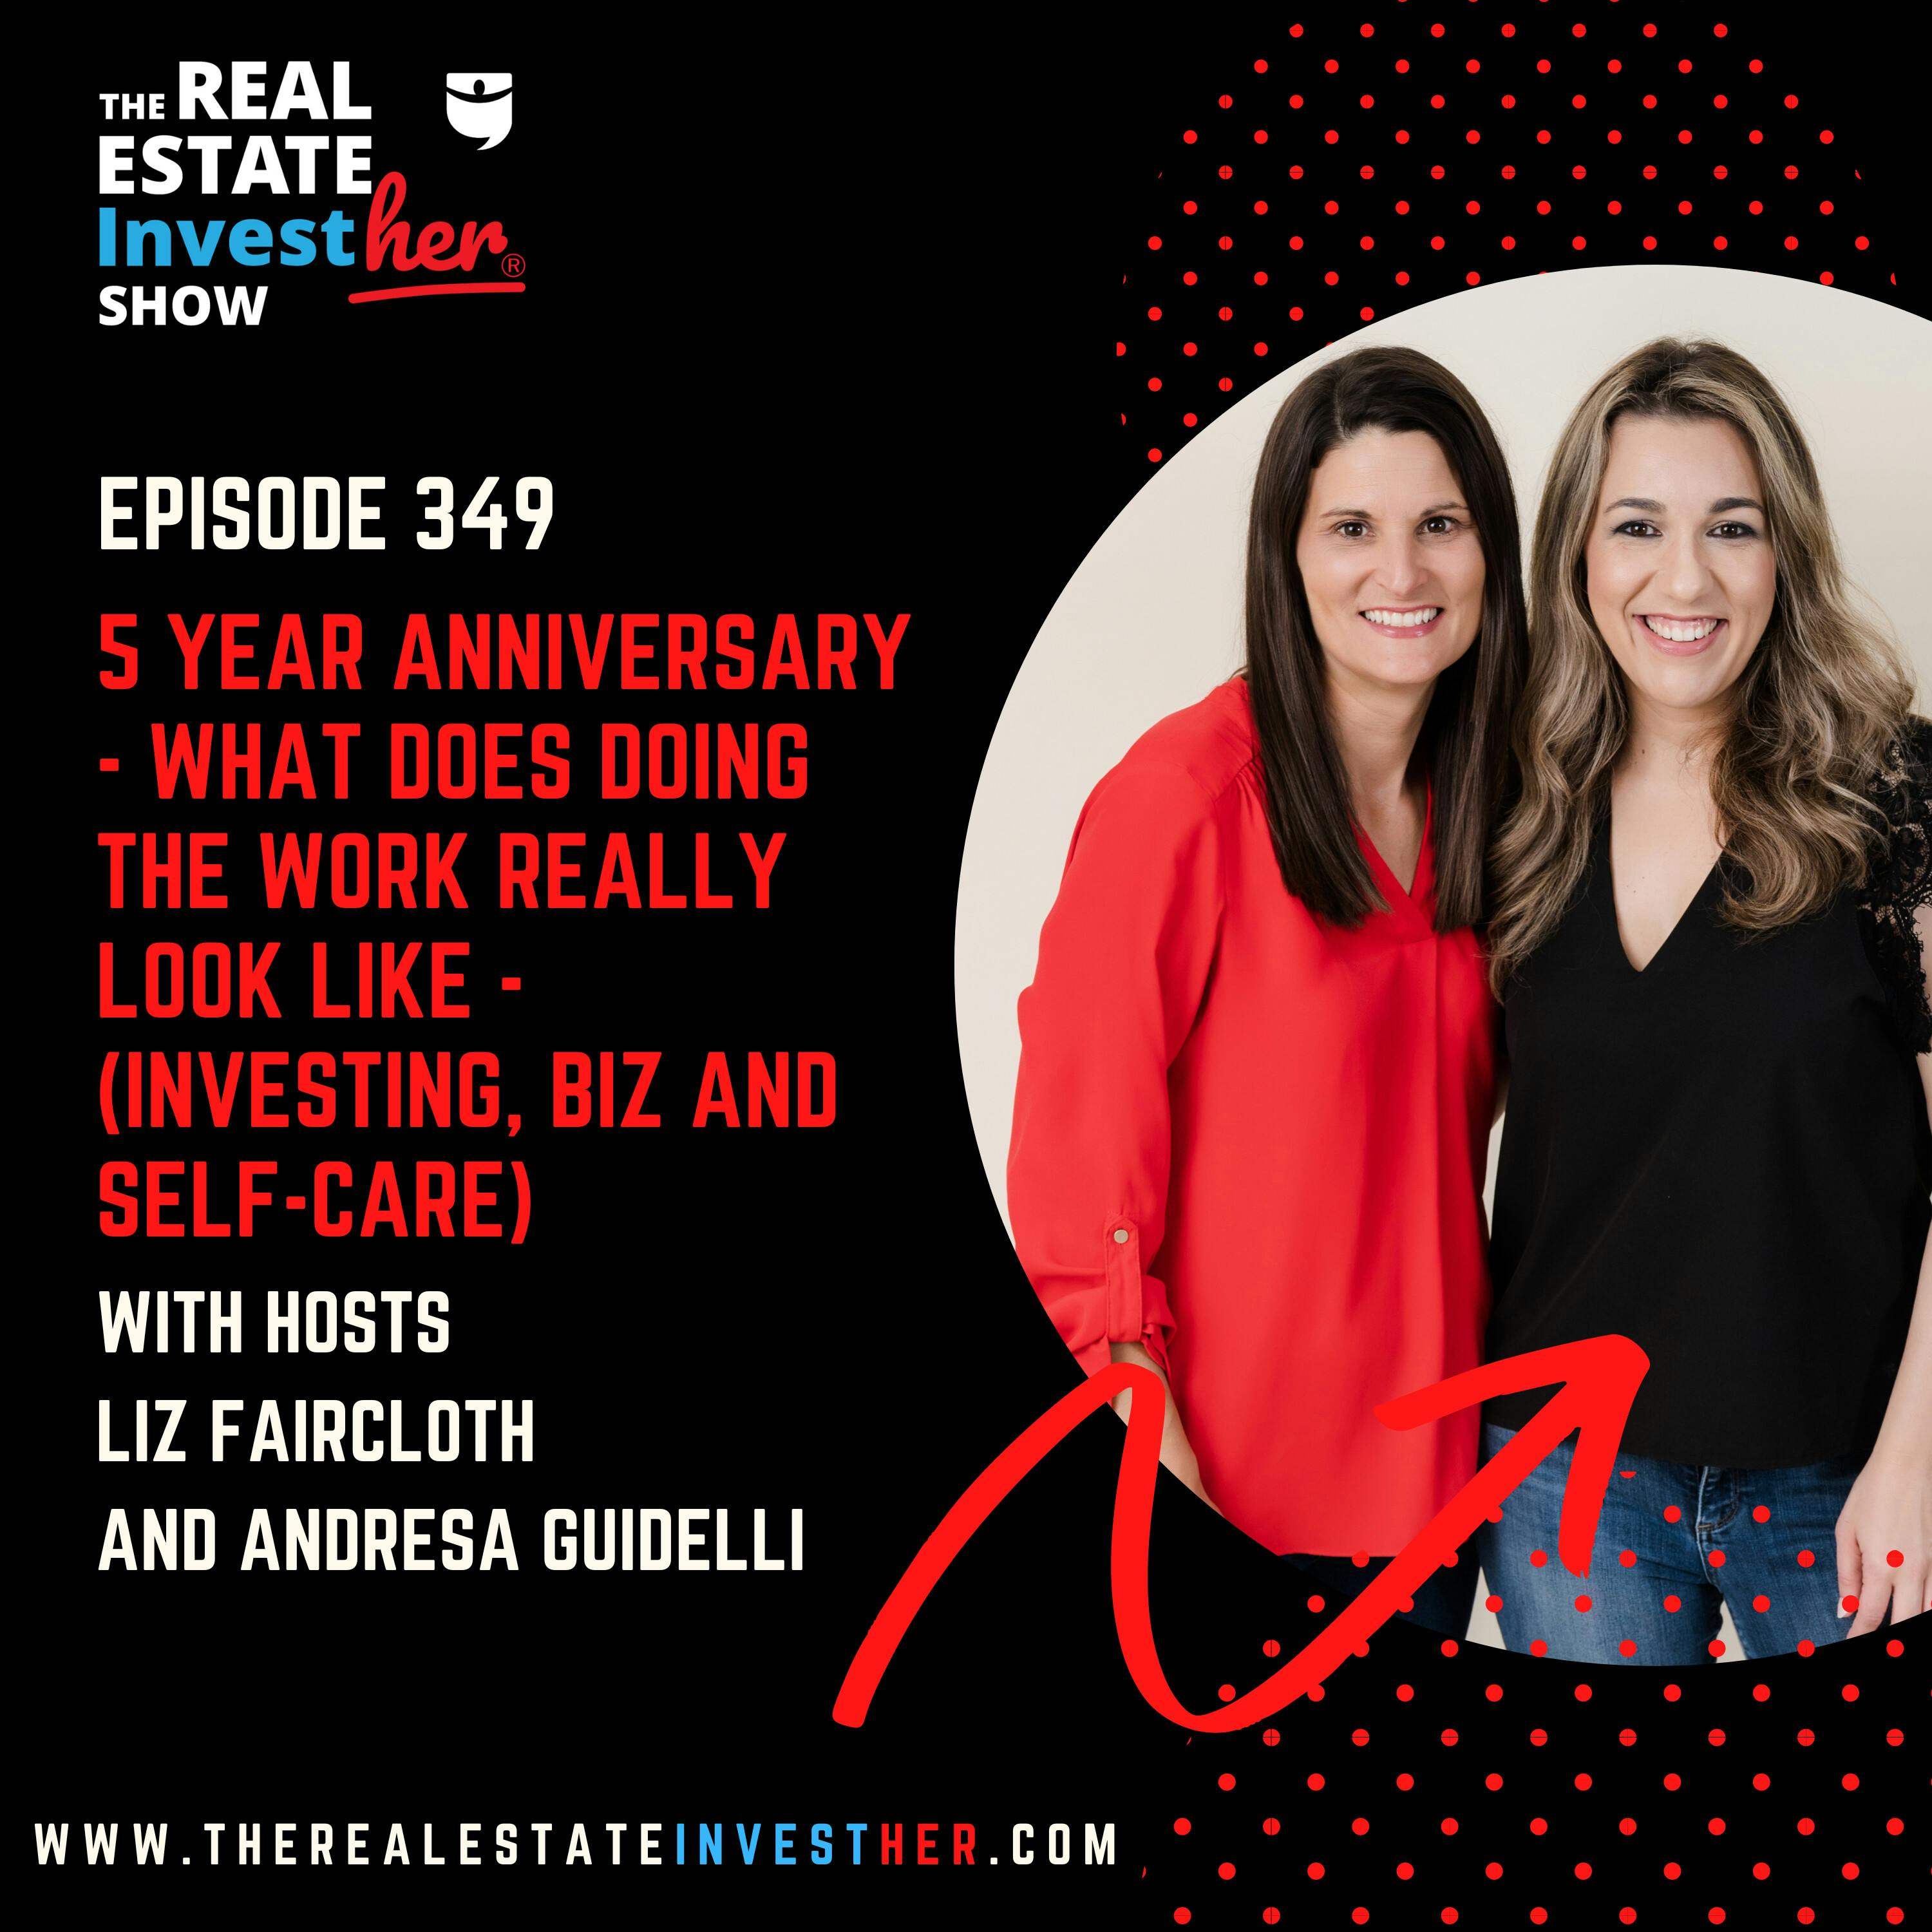 5 Year Anniversary - What does doing the work really look like - (investing, biz and self care)